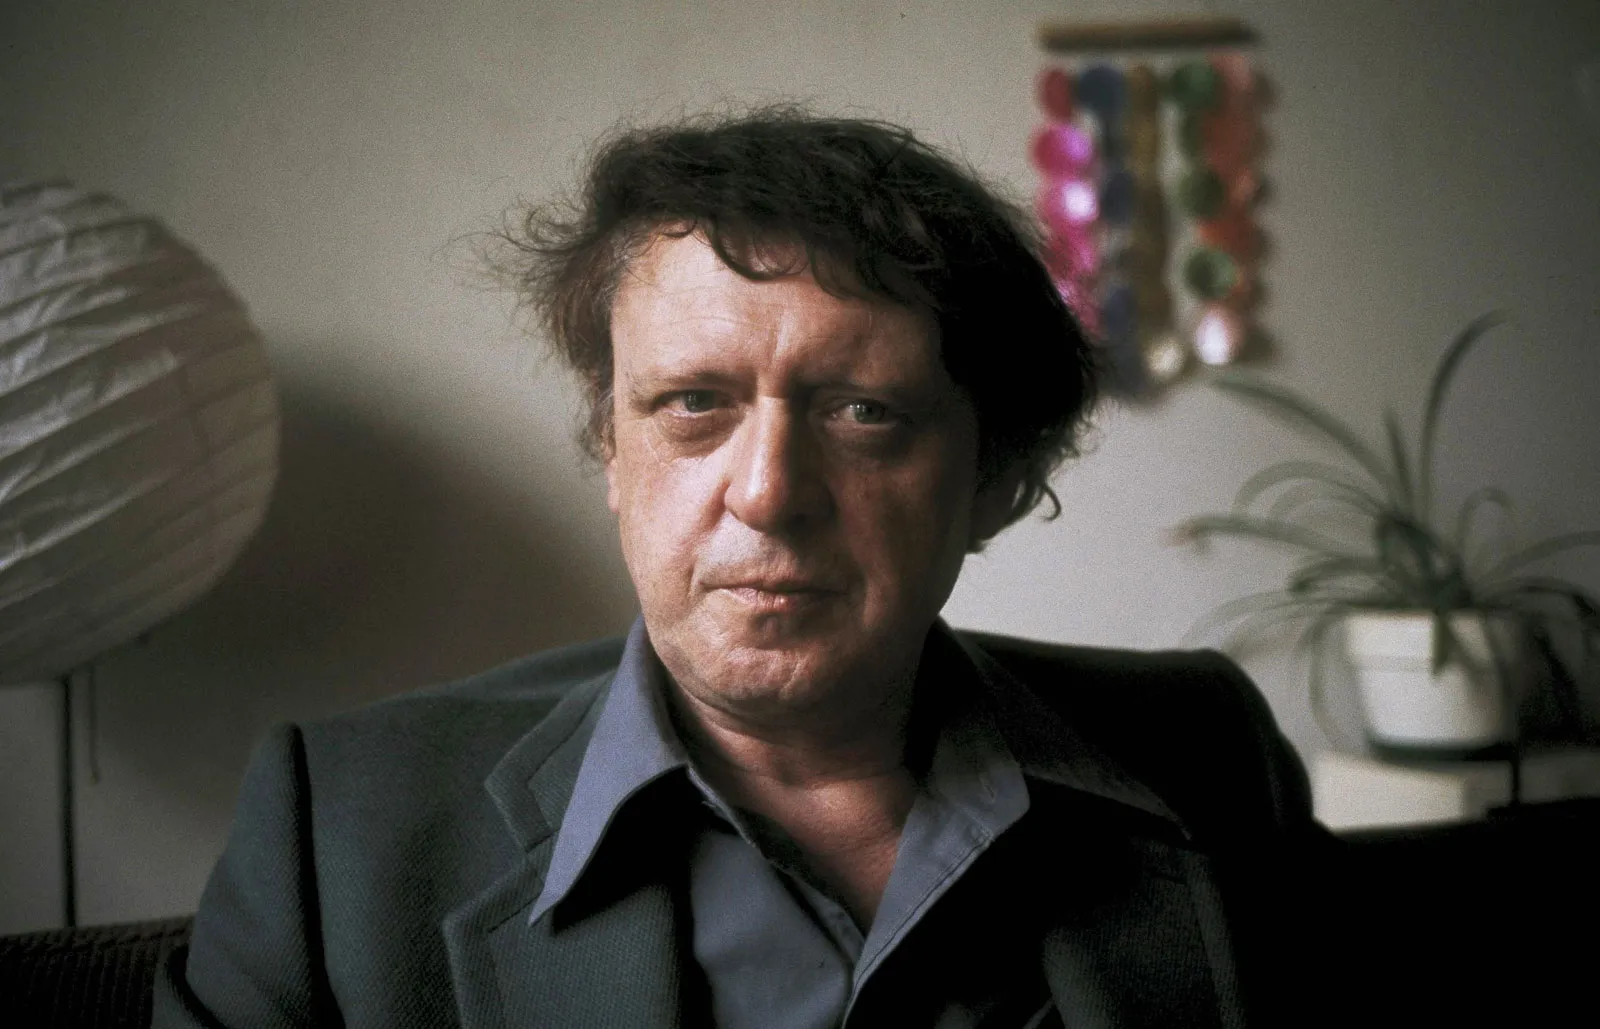 The most of Anthony Burgess